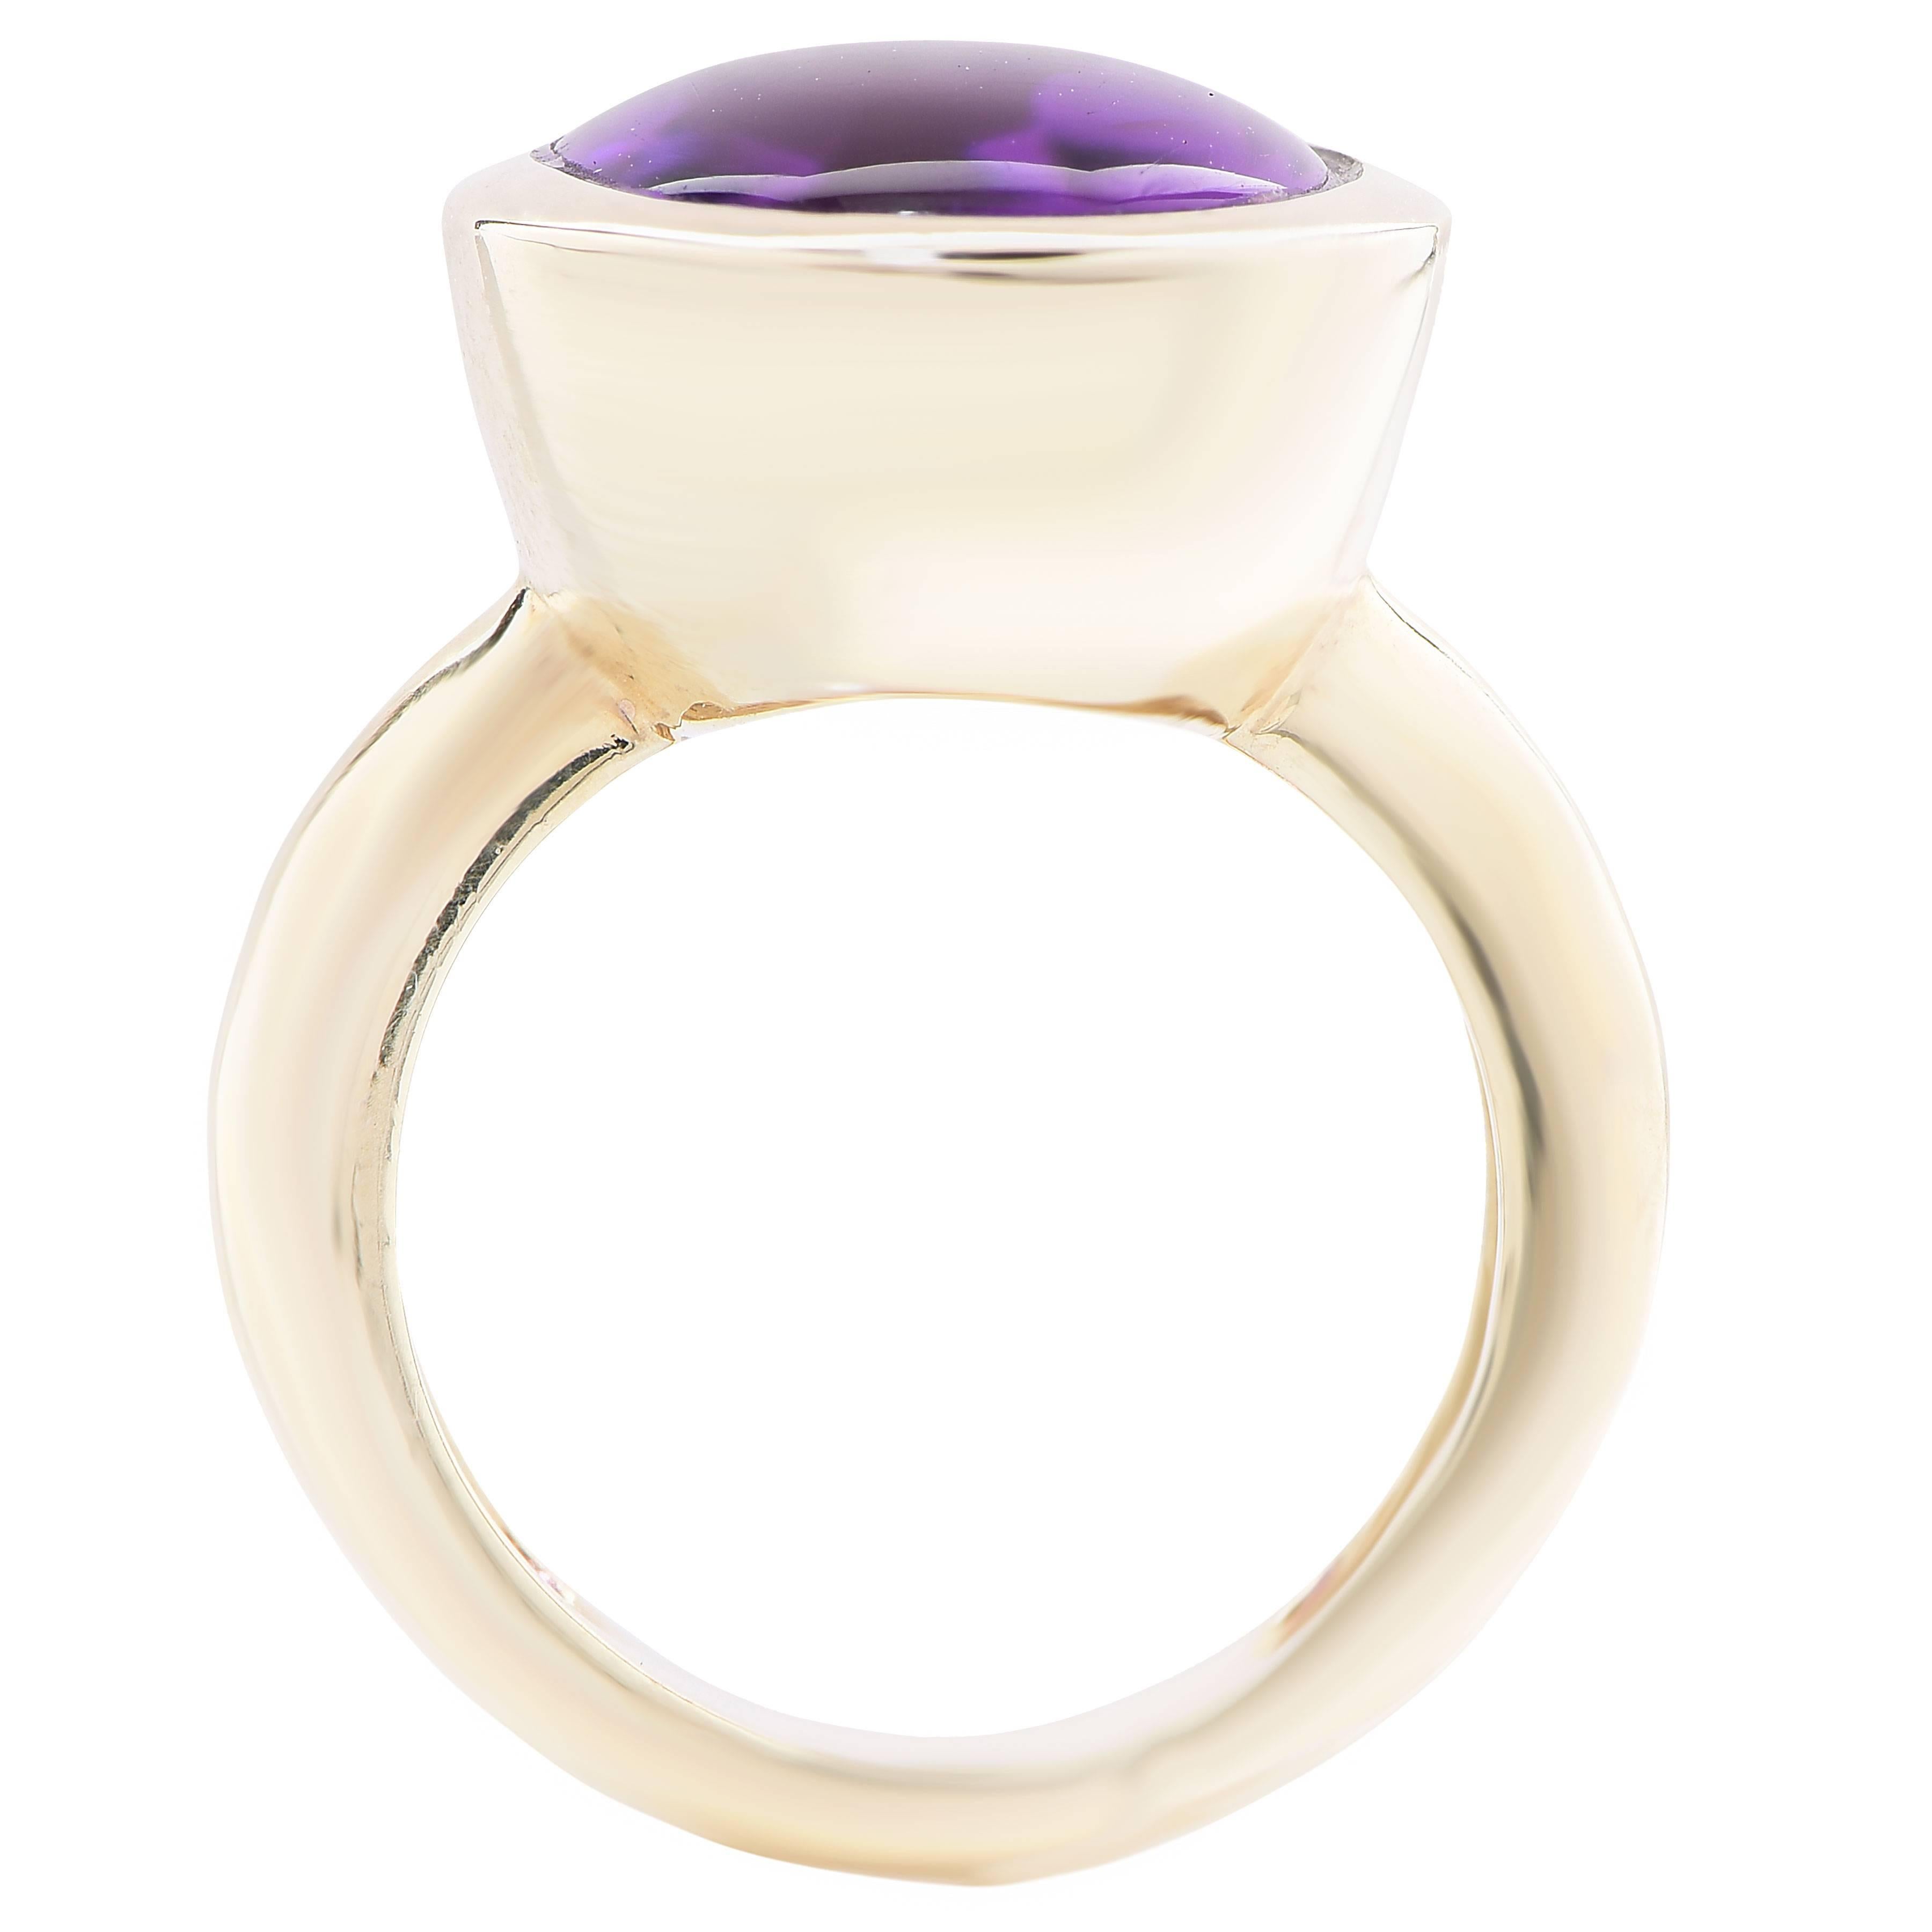 Aletto & Co. Natural 14 Carat Amethyst Cabochon Gold Bezel Set Ring In Excellent Condition For Sale In Bay Harbor Islands, FL